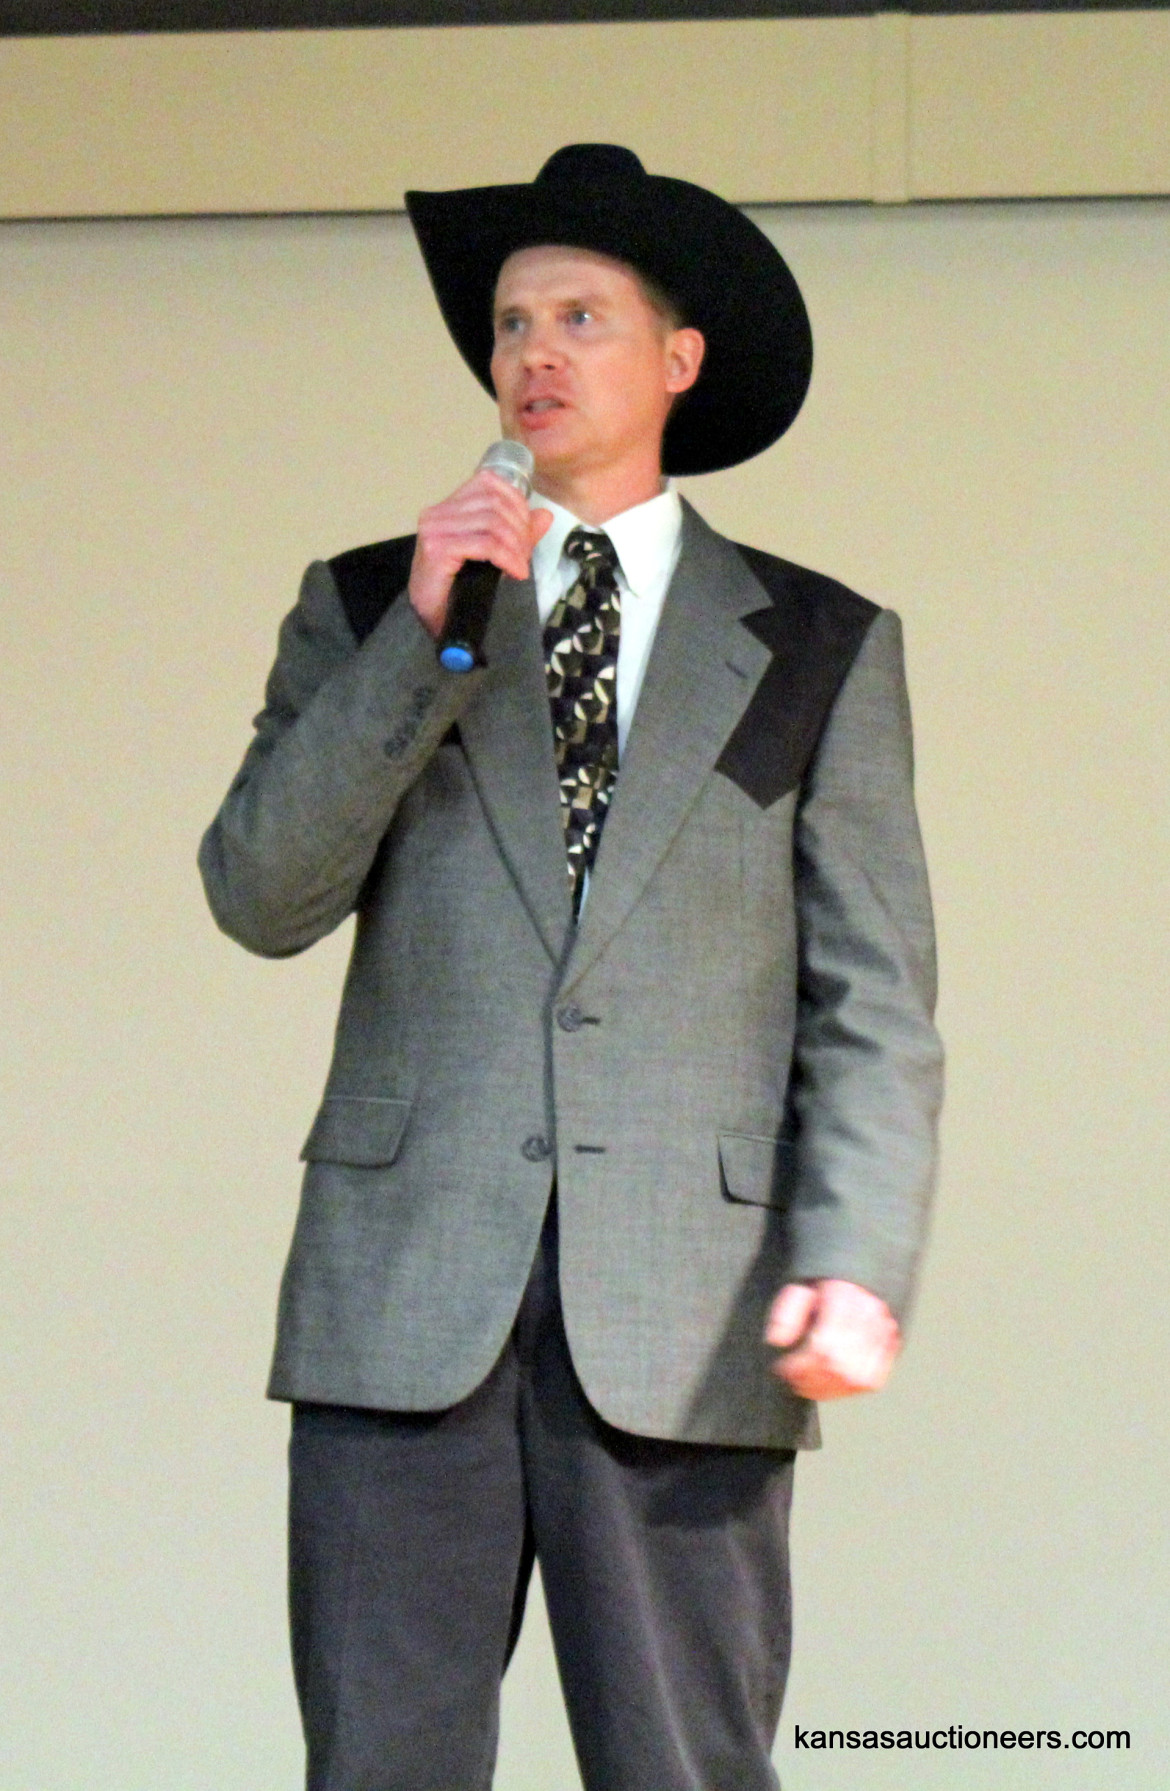 Troy Wedel competing in the 2016 Kansas Auctioneer Preliminaries.